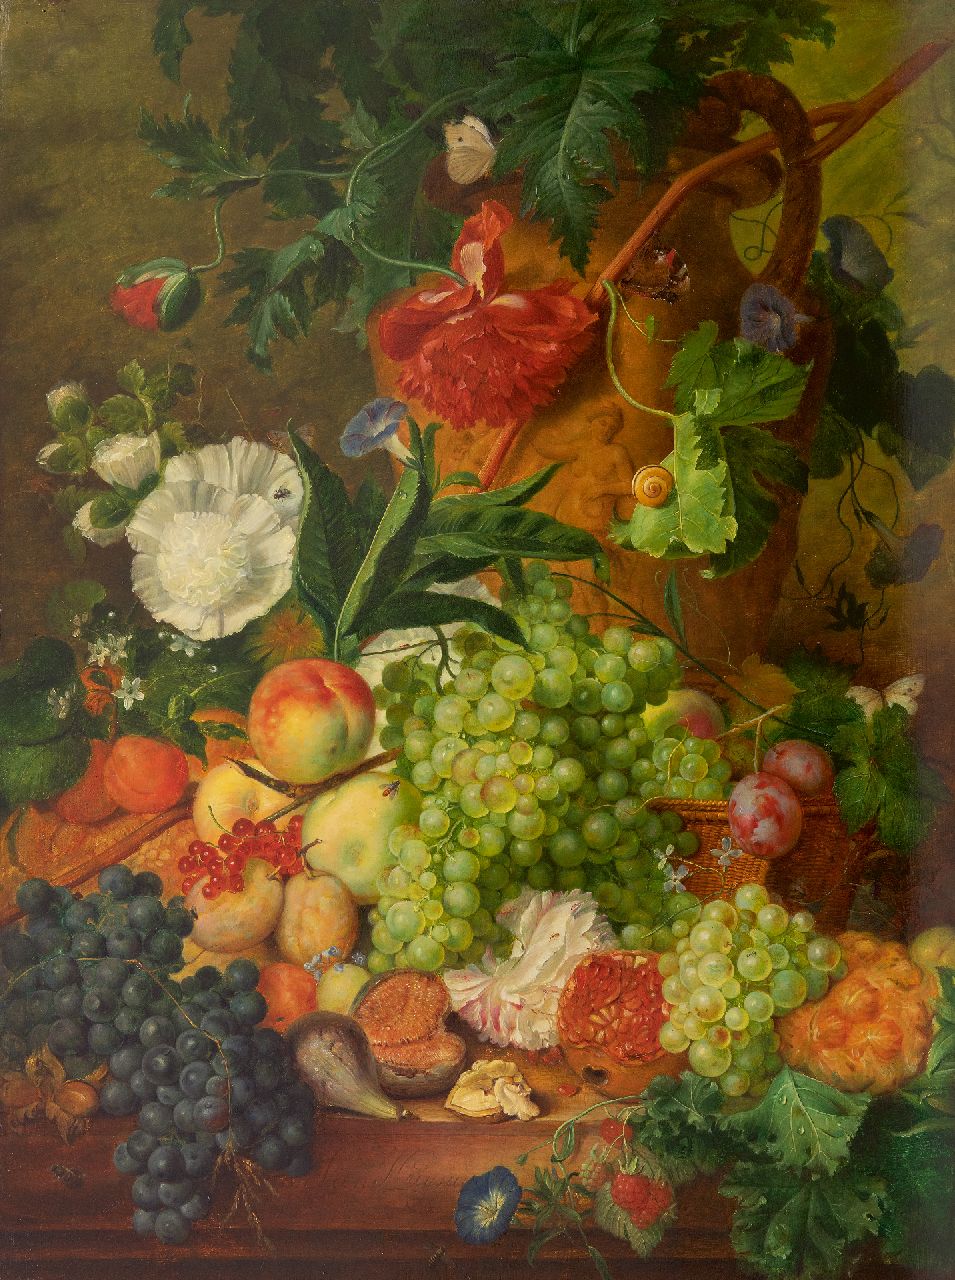 Cornelis Kuipers | Still life of flowers and fruit, oil on panel, 78.2 x 58.5 cm, signed l.c. with Jan Van Huysum